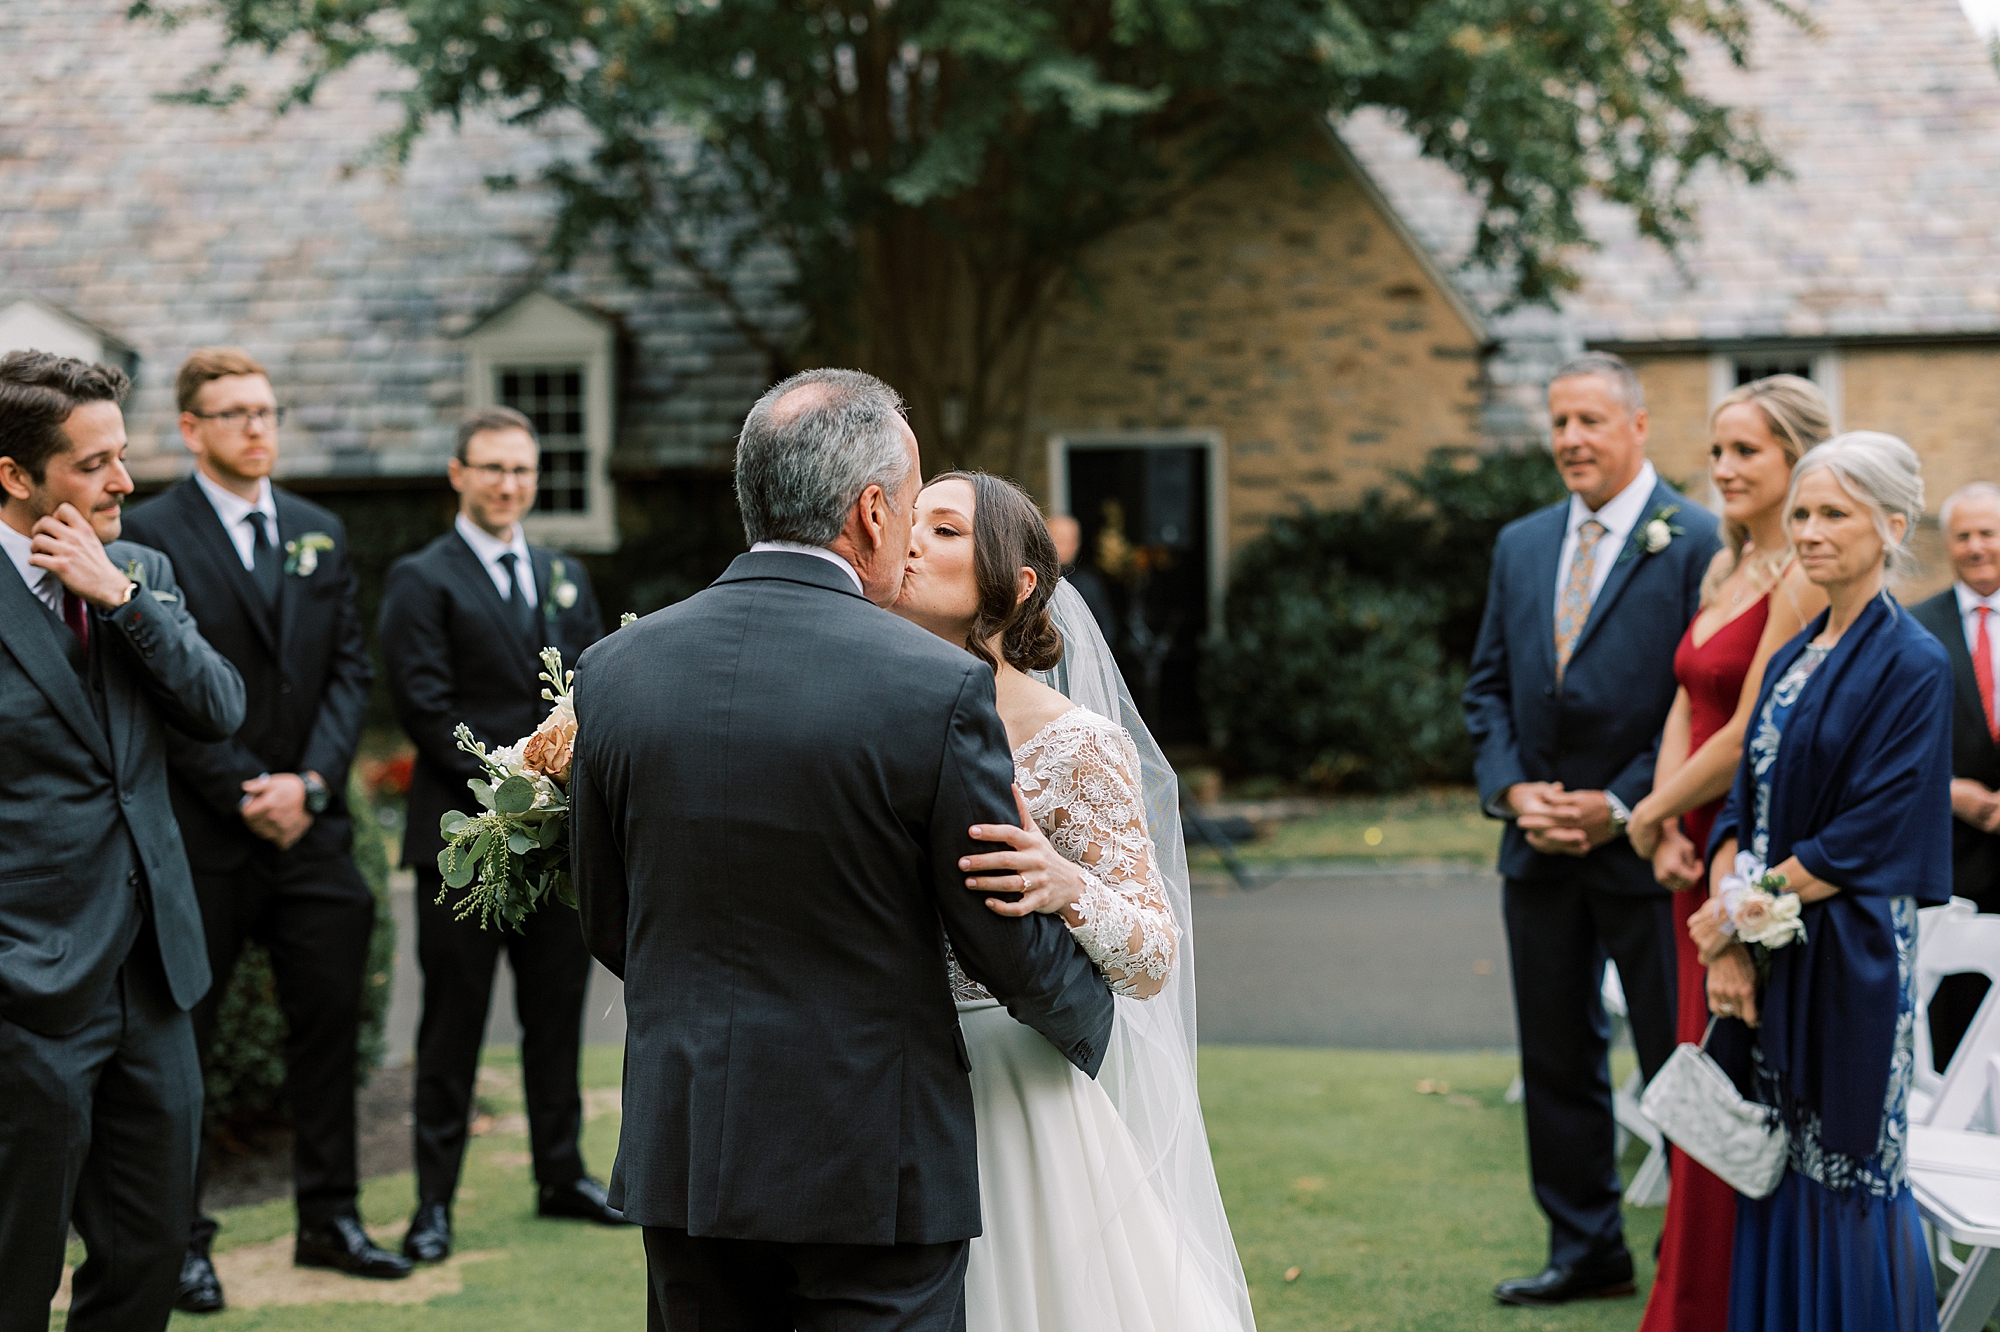 bride kisses father on cheek during wedding ceremony